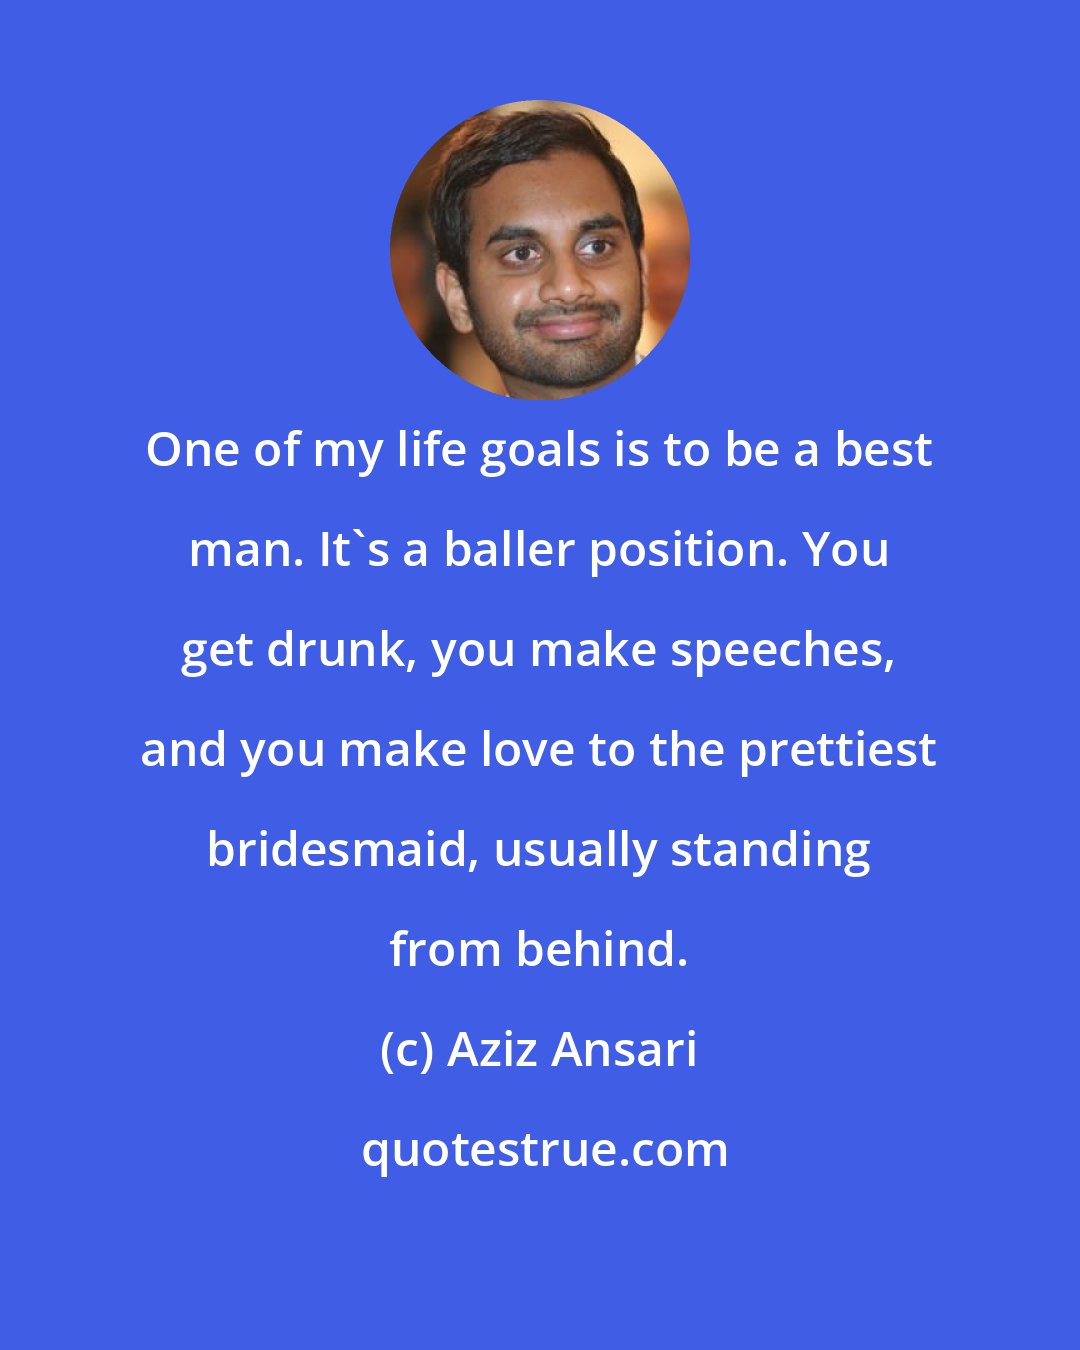 Aziz Ansari: One of my life goals is to be a best man. It's a baller position. You get drunk, you make speeches, and you make love to the prettiest bridesmaid, usually standing from behind.